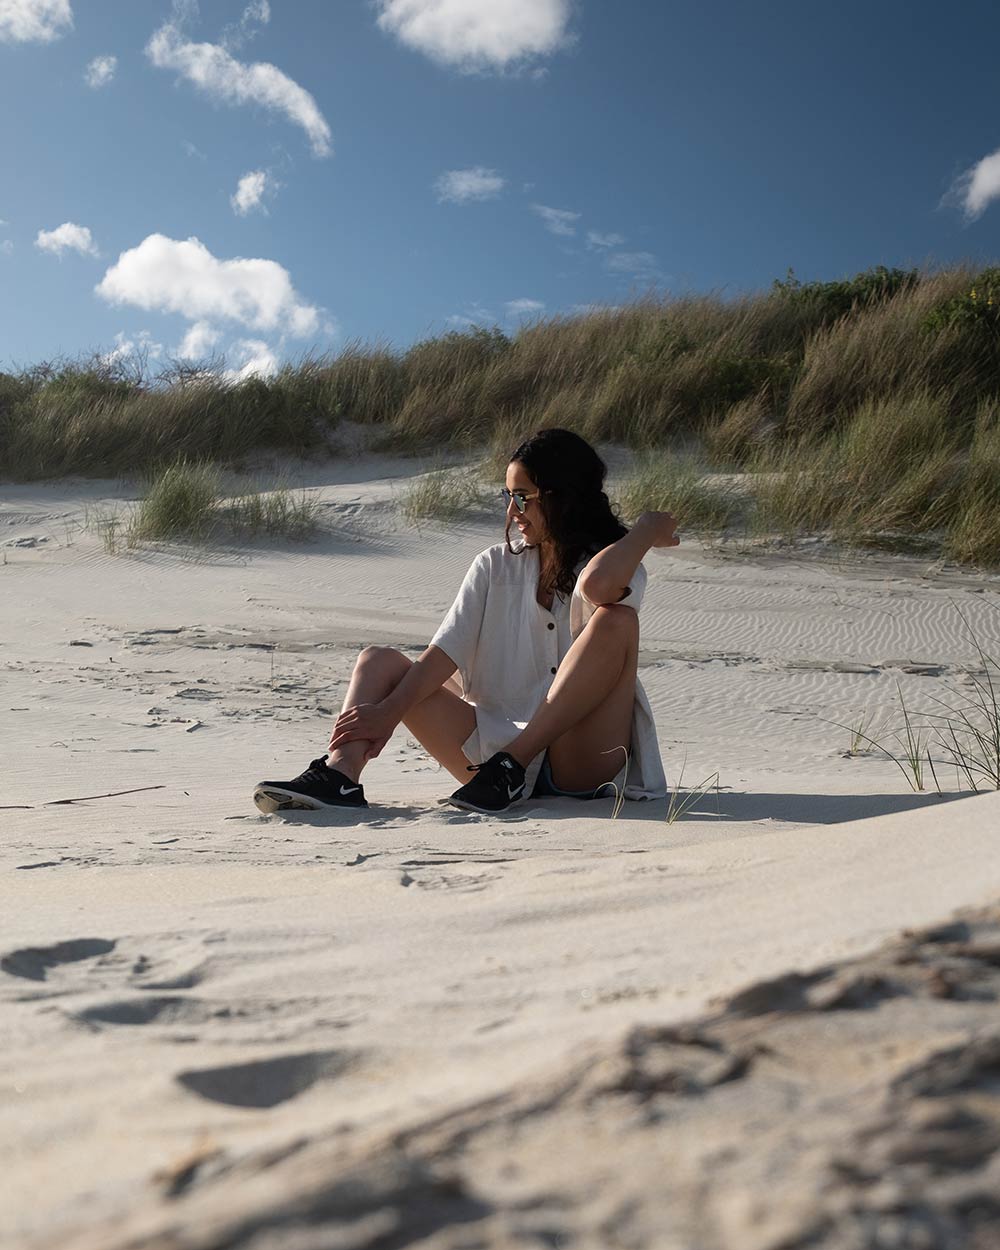 A woman sits on the sand of a beach with grassy hills and a beautiful blue sky behind her. This is the RAW unedited image without a preset applied.